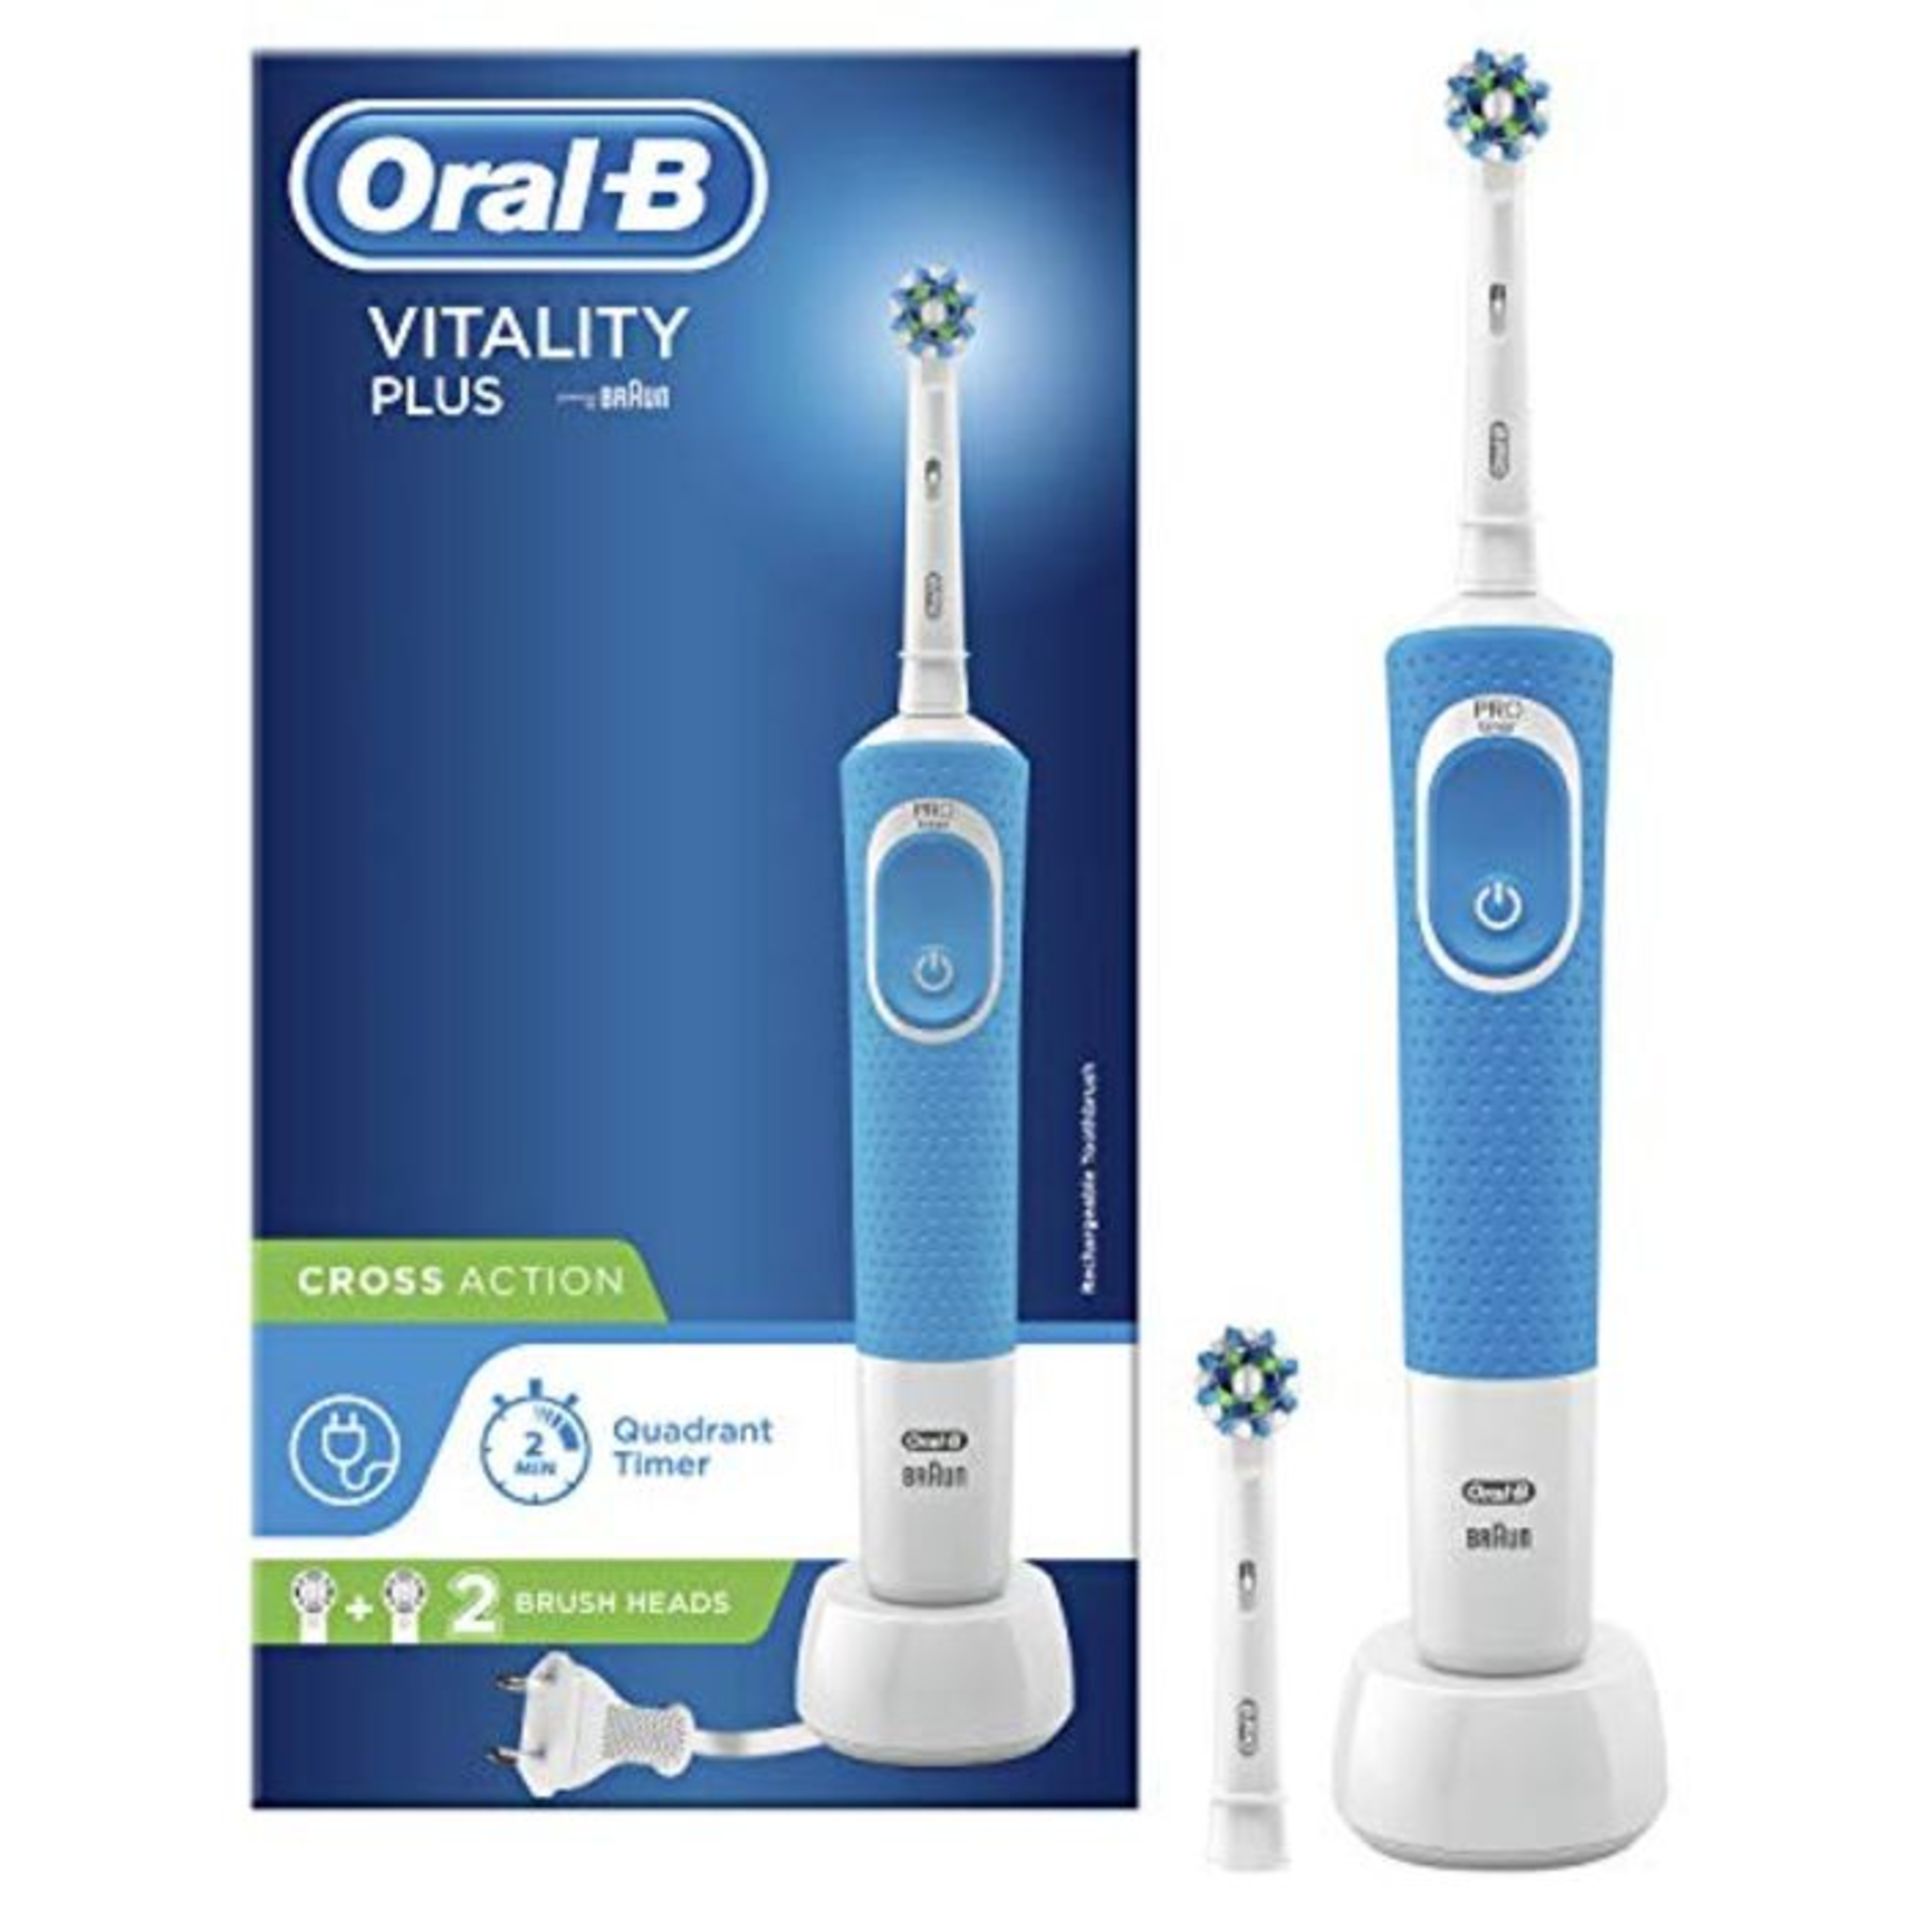 Oral-B Vitality Plus CrossAction Electric Rechargeable Toothbrush, 1 Blue Handle, 2 Br